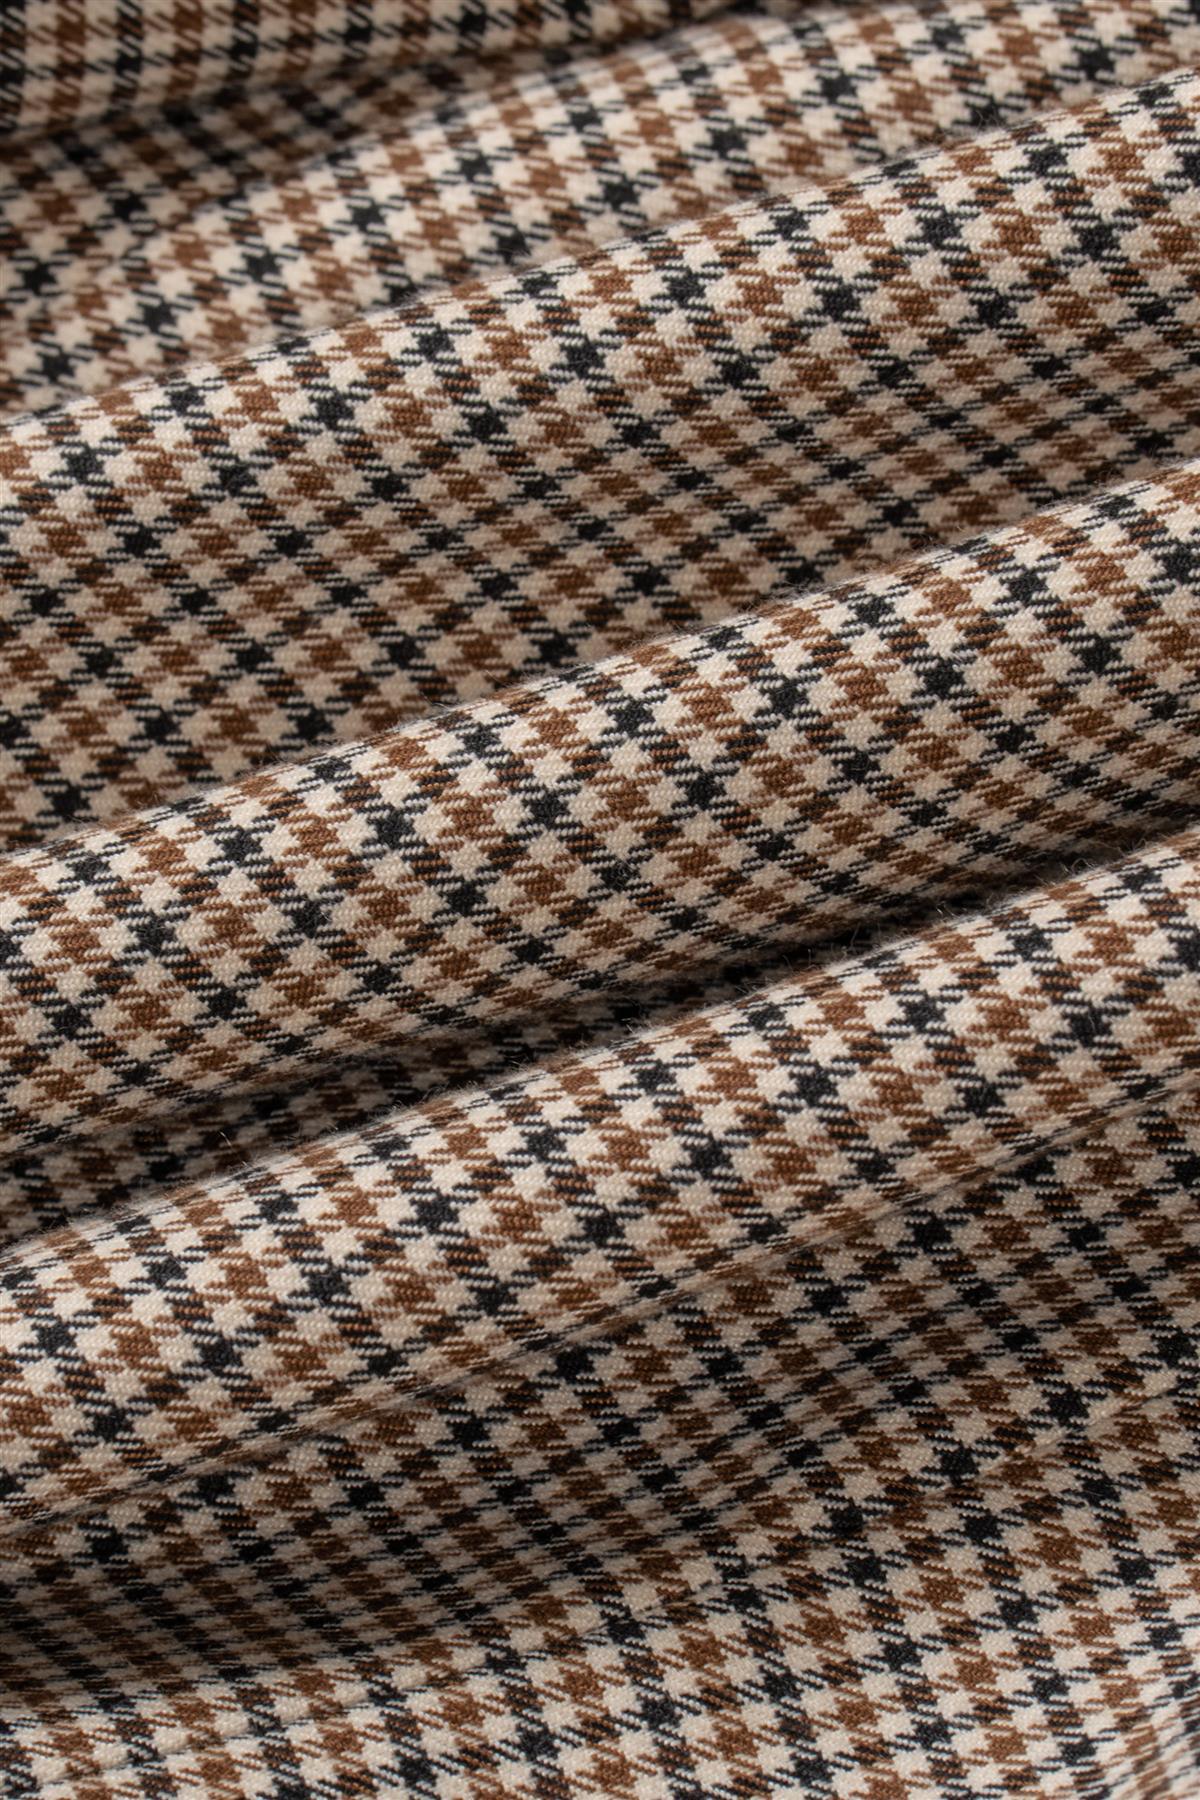 Elwood houndstooth check waistcoat fabric swatch